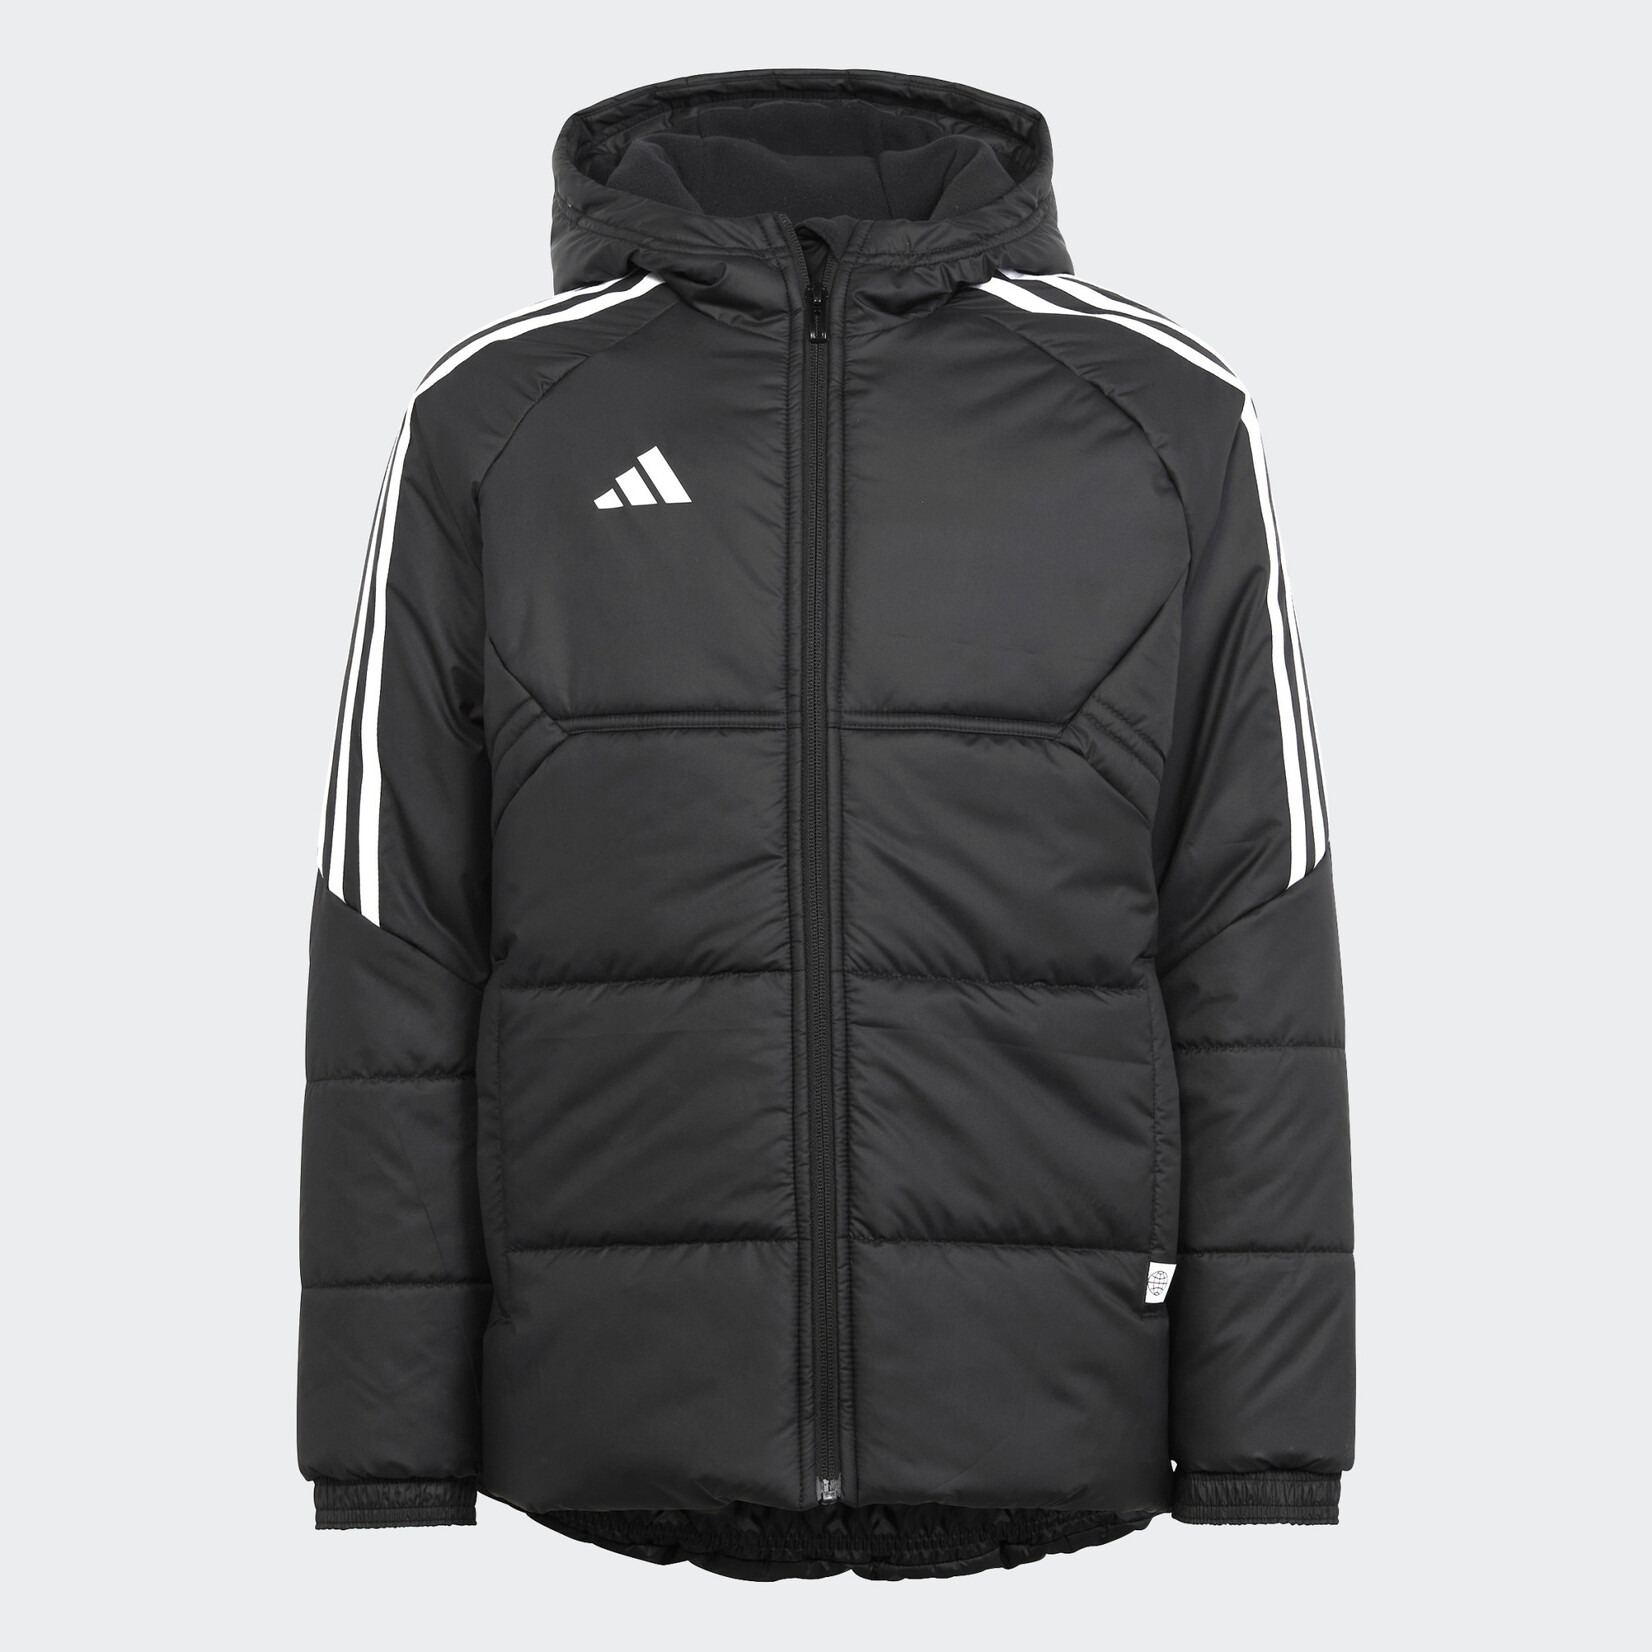 Adidas Con22 Winter Jacket (Embroidered Logo and Initials Included)